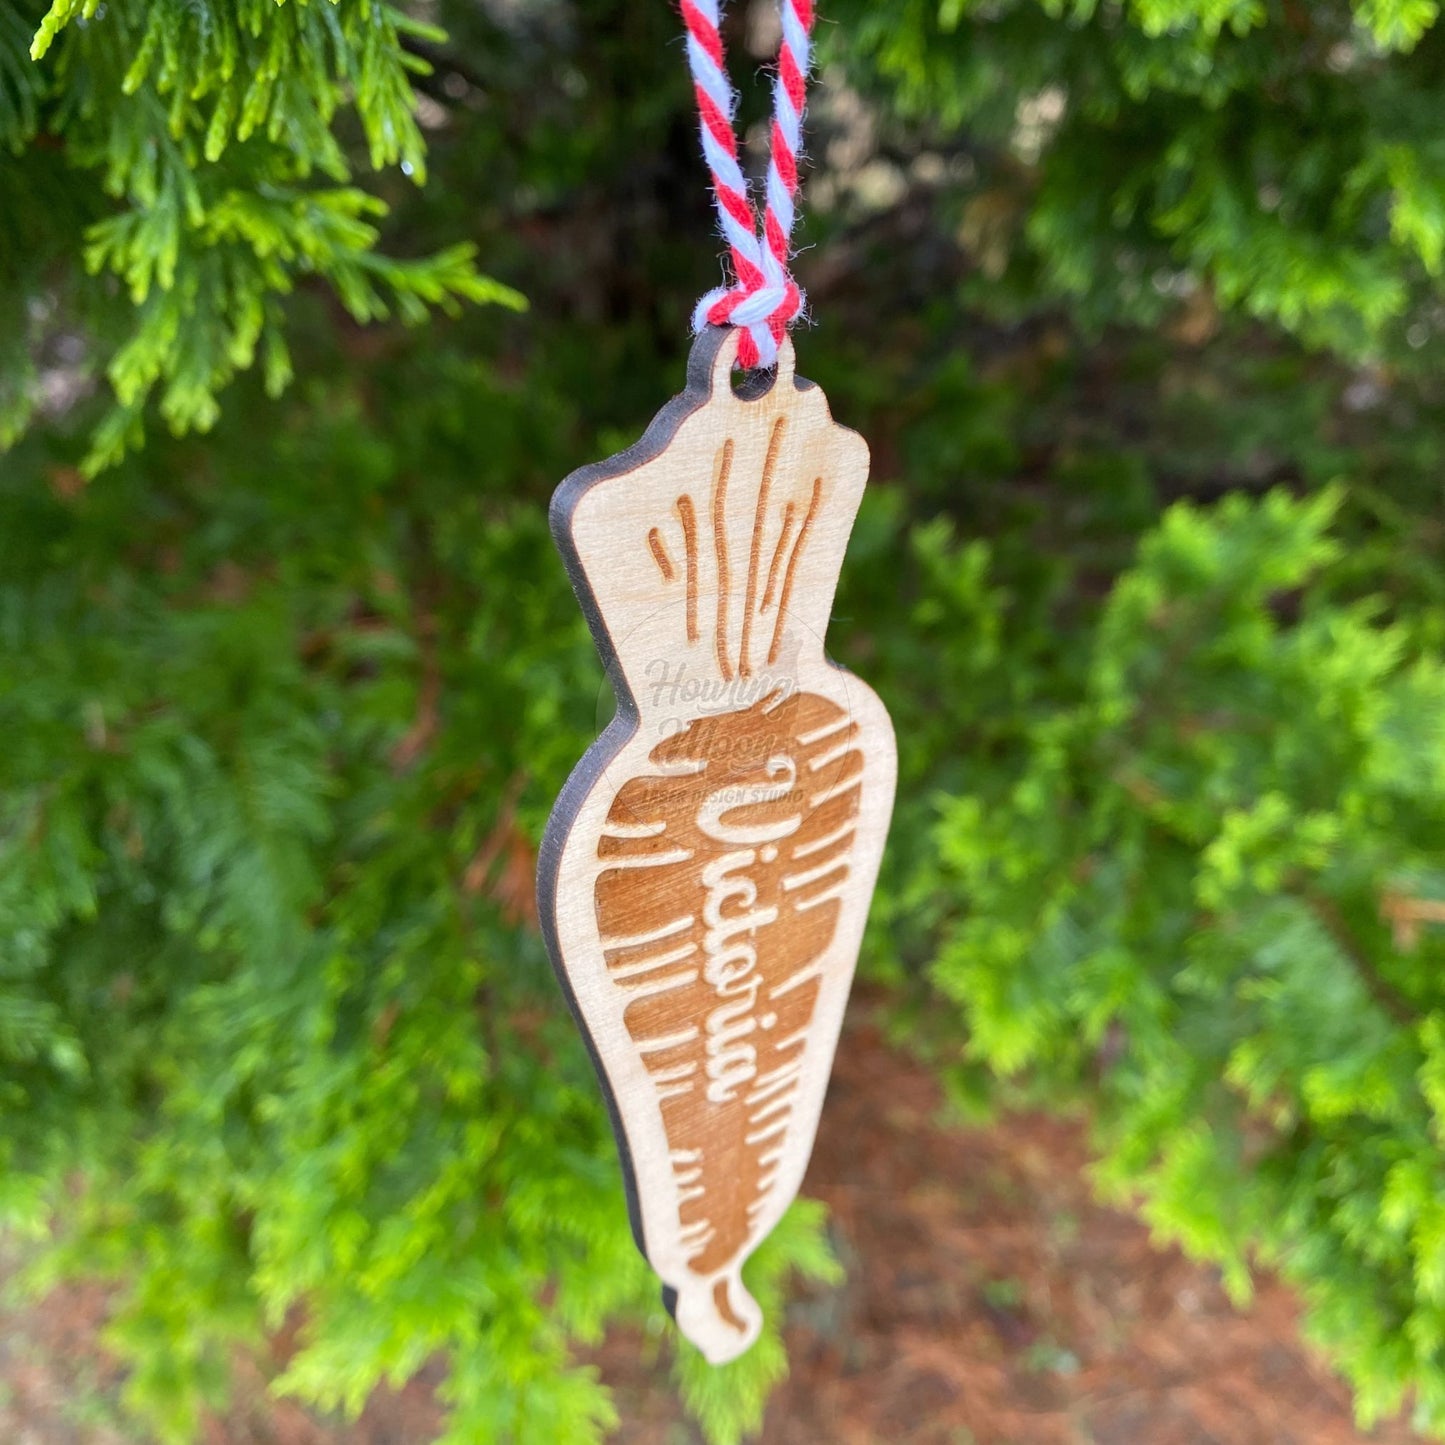 Side view of Carrot ornament hanging from tree - made by Howling Moon Laser Design in Virginia, USA